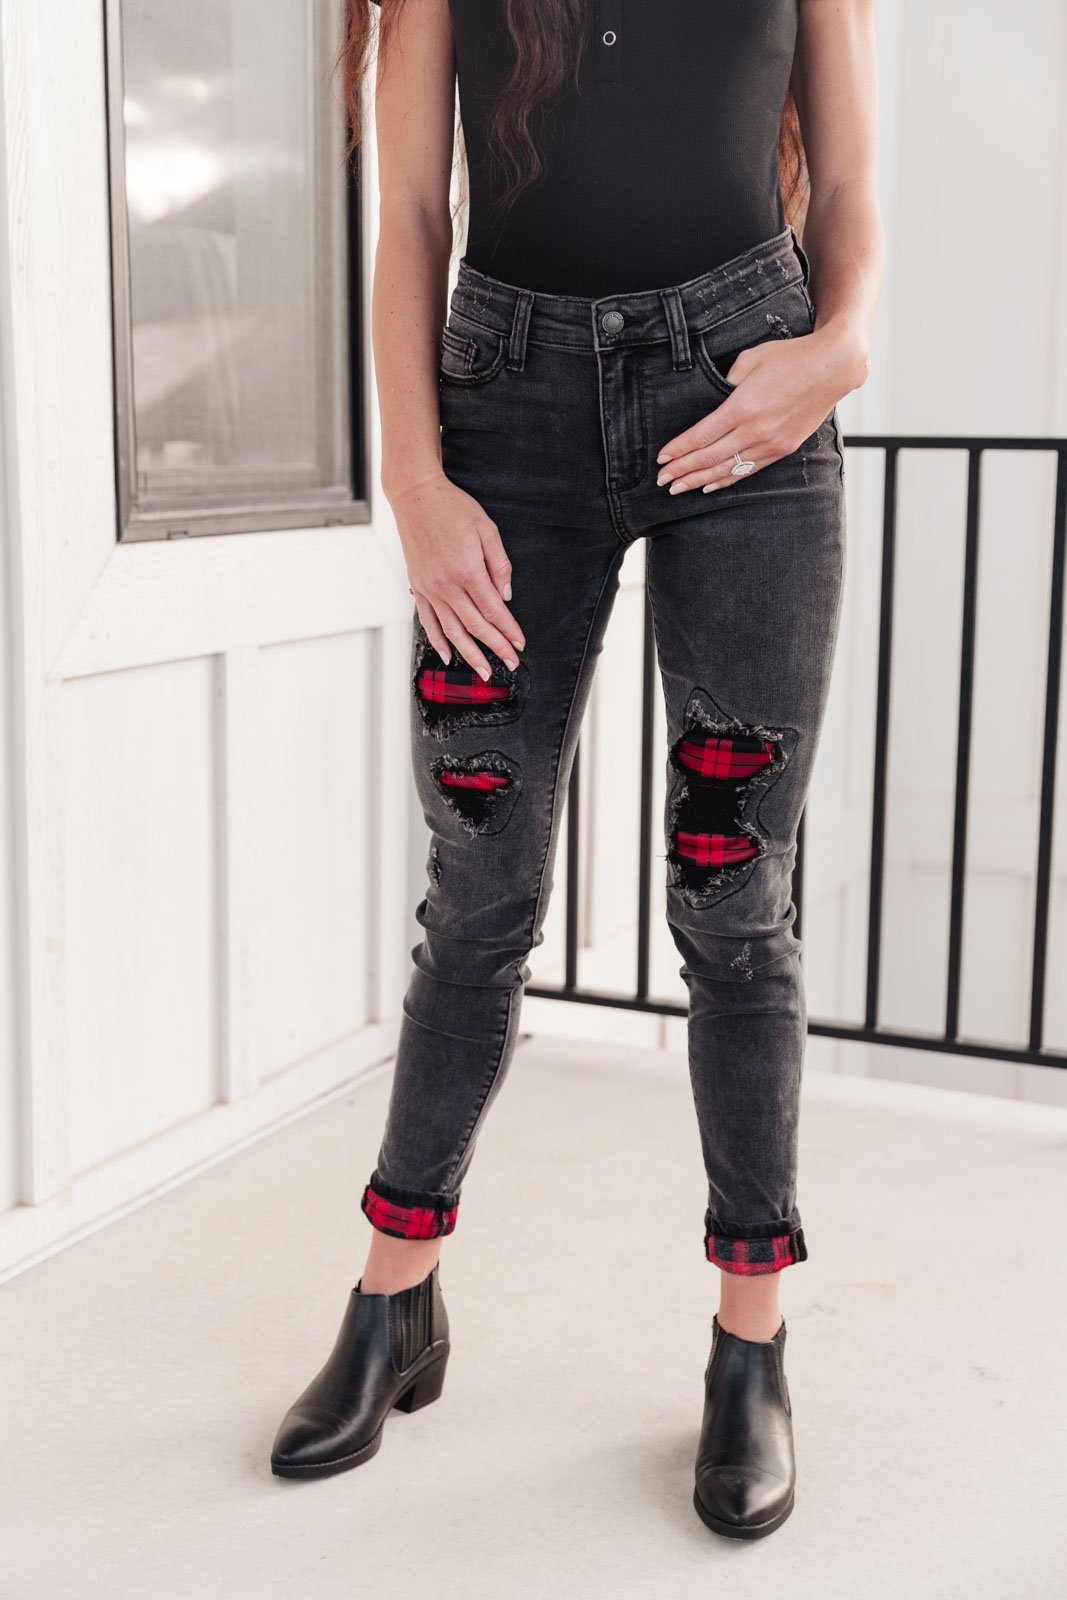 DOORBUSTER Plaid Peek-A-Boo Jeans in Charcoal